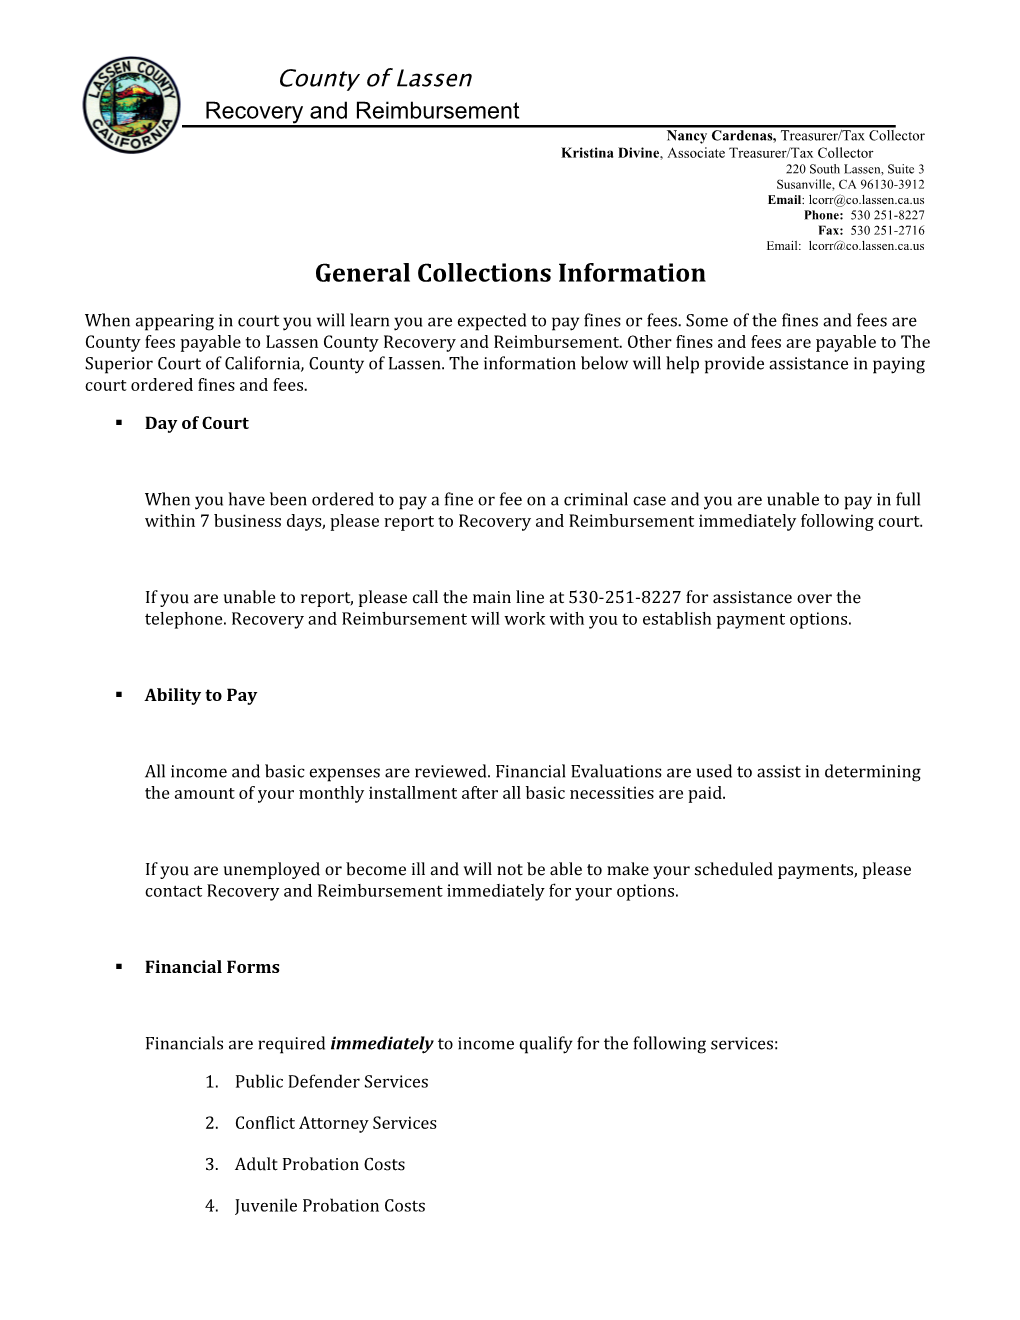 General Collections Information